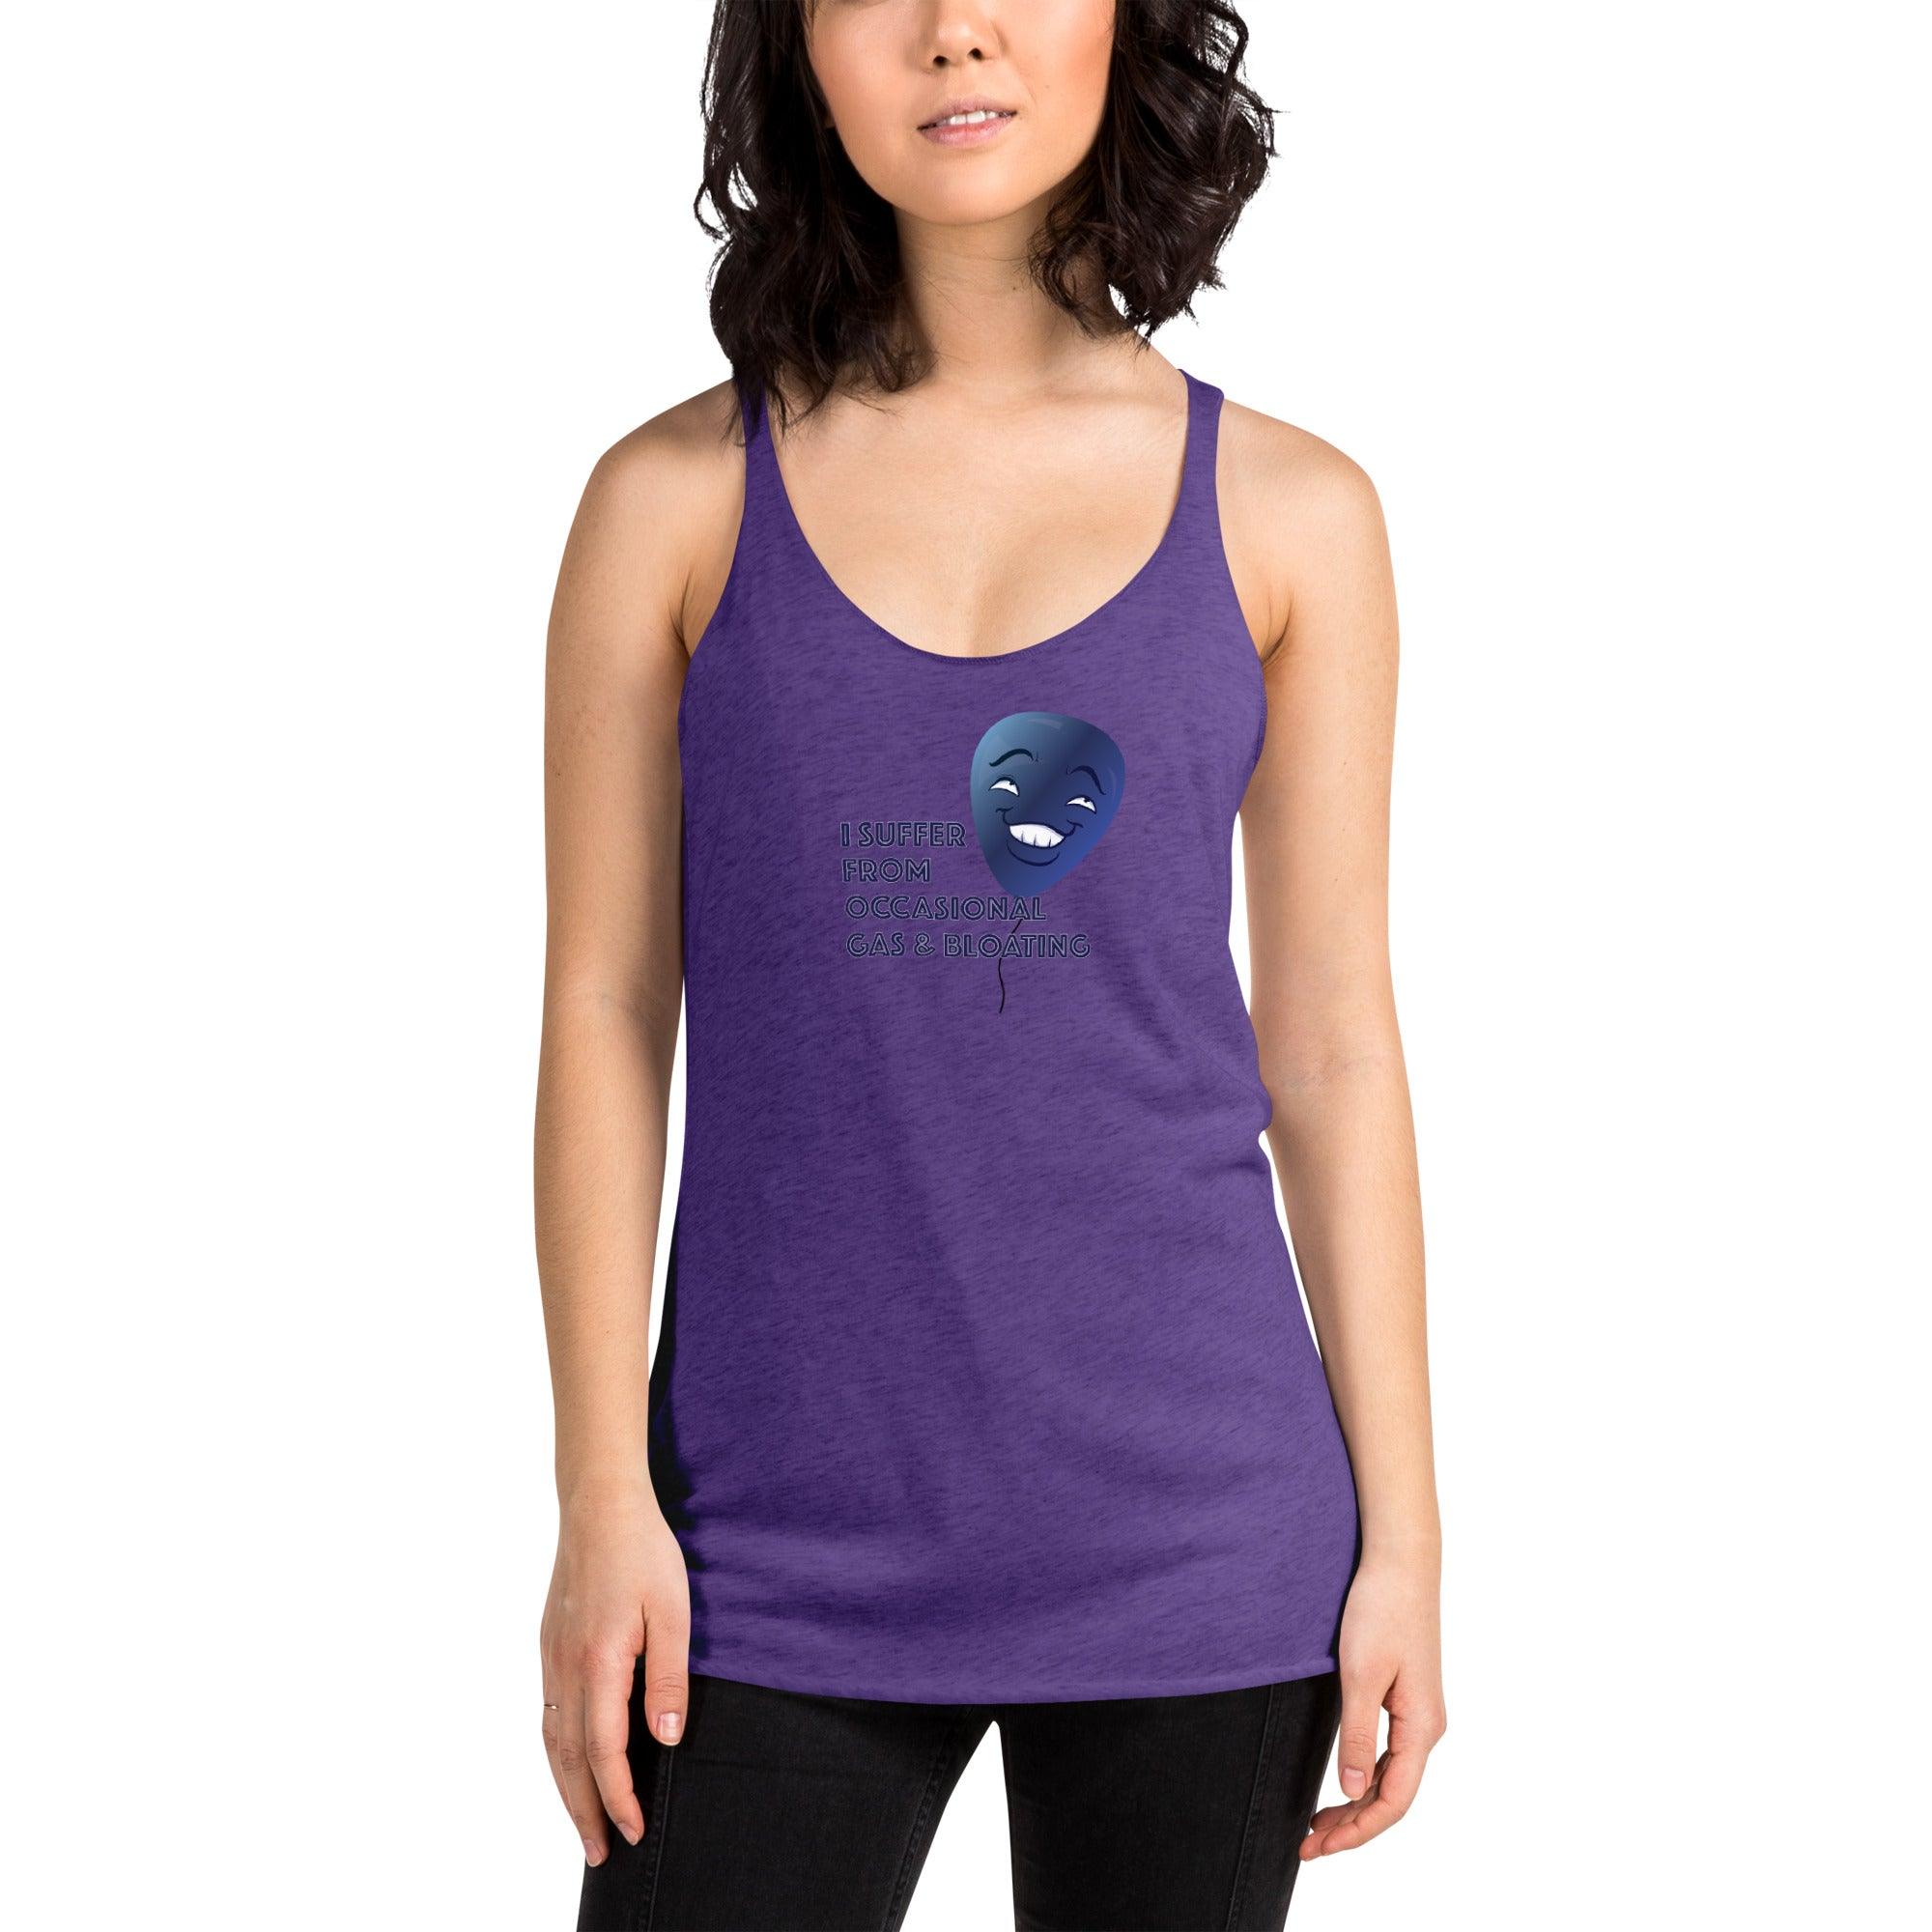 I Suffer From Occasional Gas and Bloating  Women's Racerback Tank